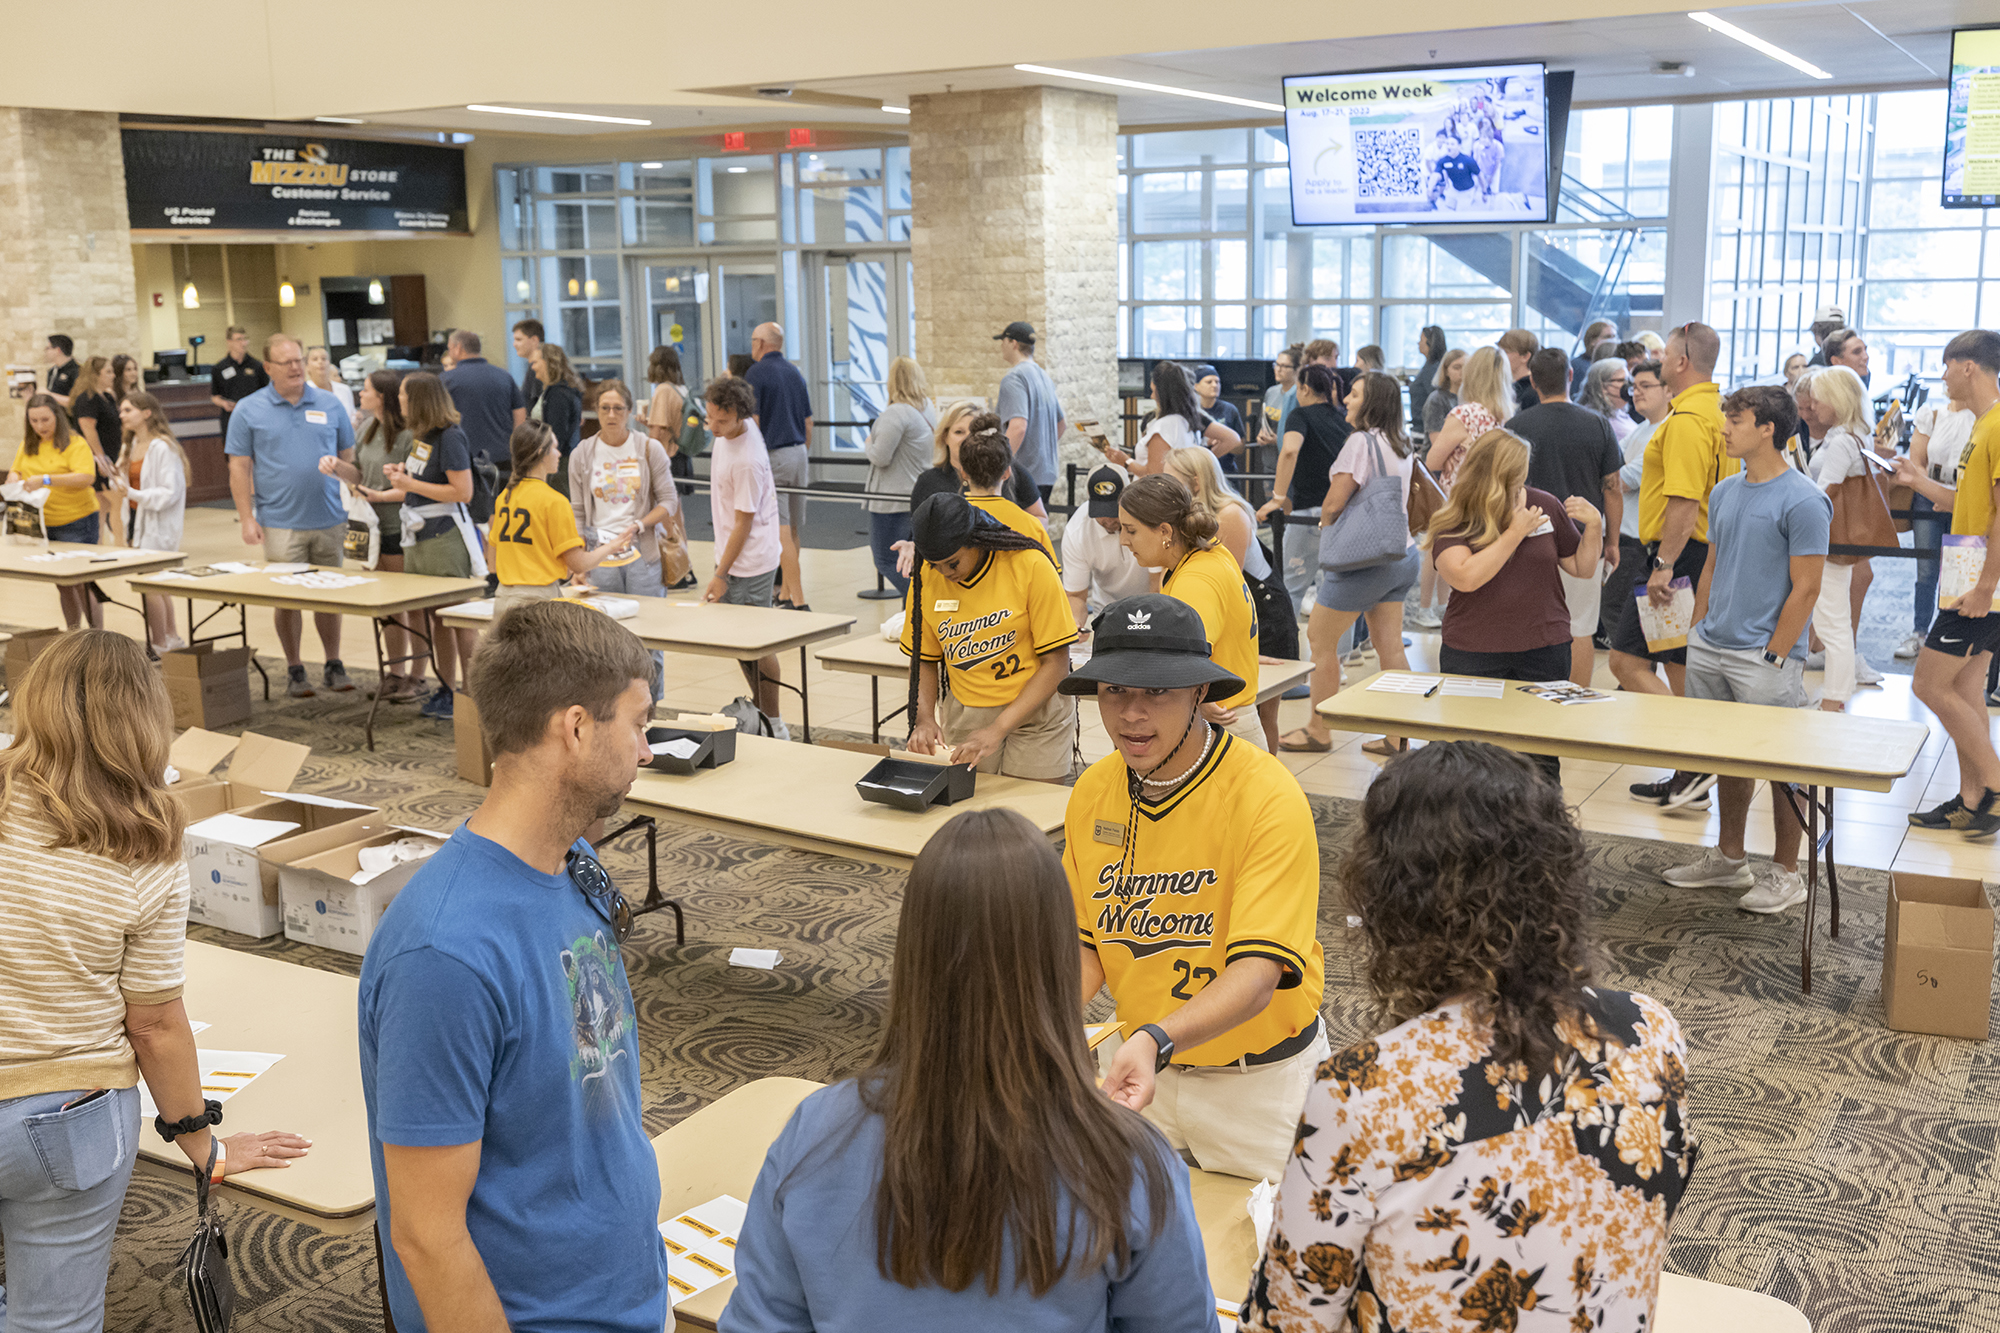 summer welcome leaders help new students at an information fair at the student center